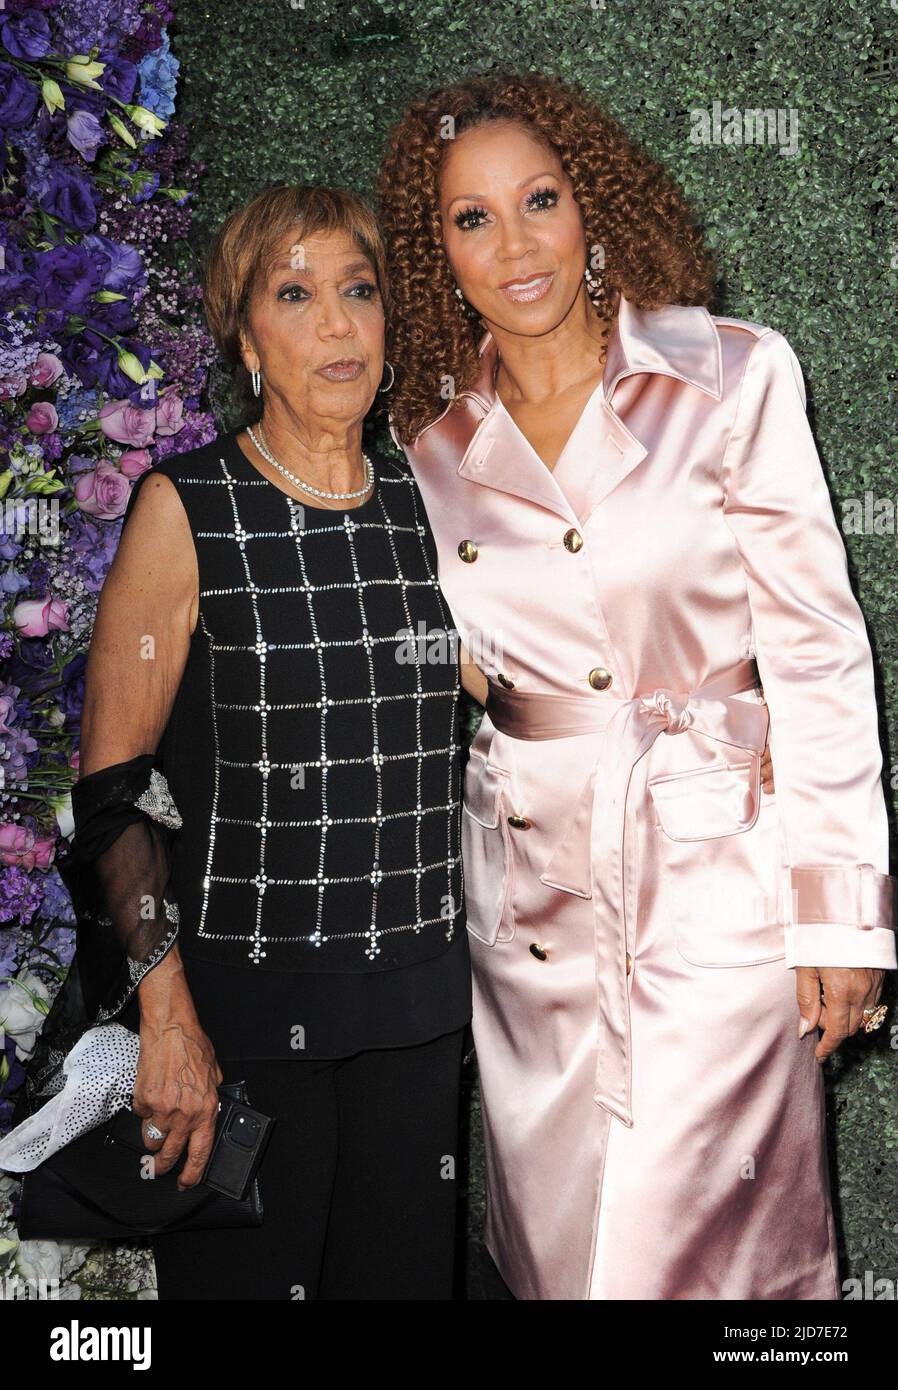 Los Angeles, CA. 18th June, 2022. Dolores Robinson, Holly Robinson Peete at arrivals for The HollyRod Foundation Humanitarian Award Celebration, RJ's Place, Los Angeles, CA June 18, 2022. Credit: Elizabeth Goodenough/Everett Collection/Alamy Live News Stock Photo